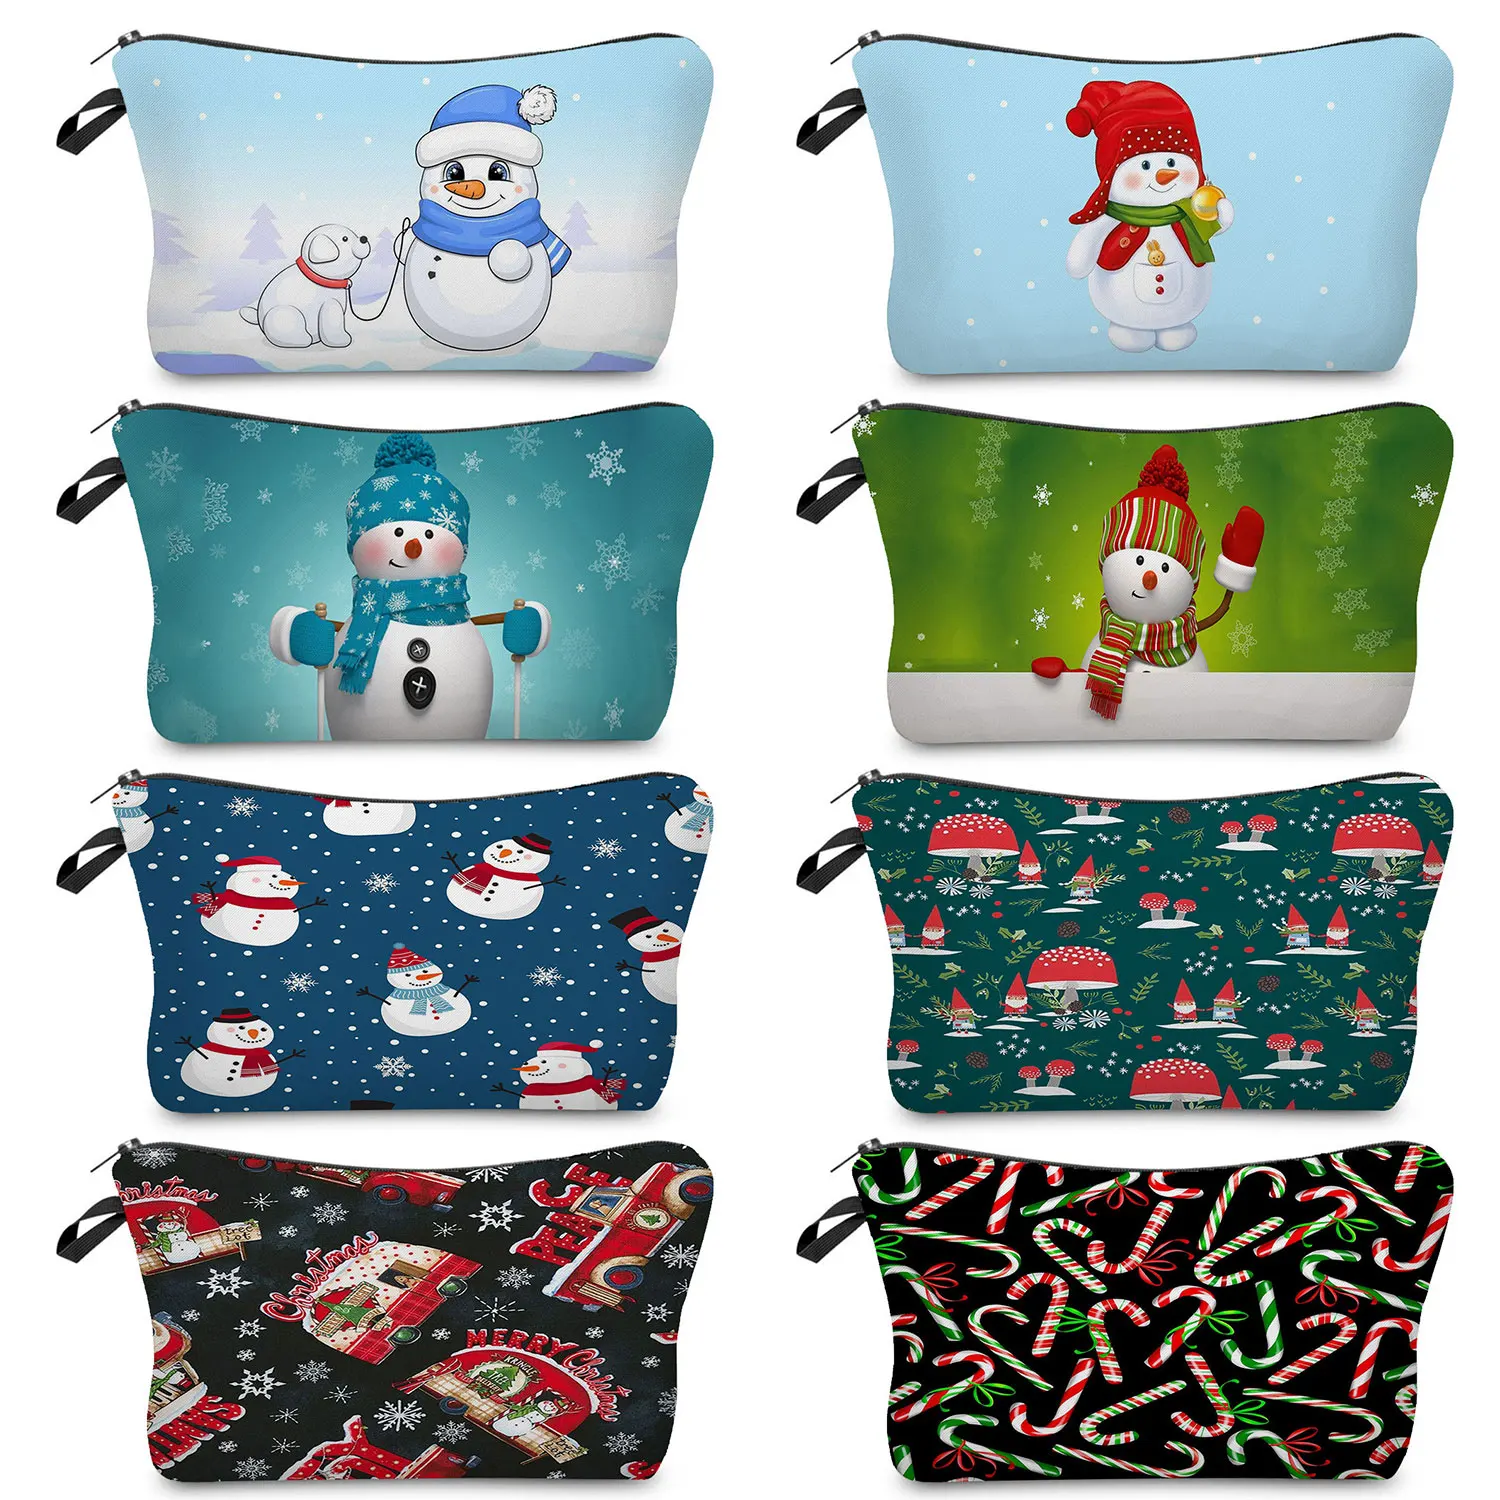 

Children's Gift Cosmetic Bag Travel Toiletry Kit Portable Christmas New Year Gift Storage Bag Organizer Makeup Bag New In Friend